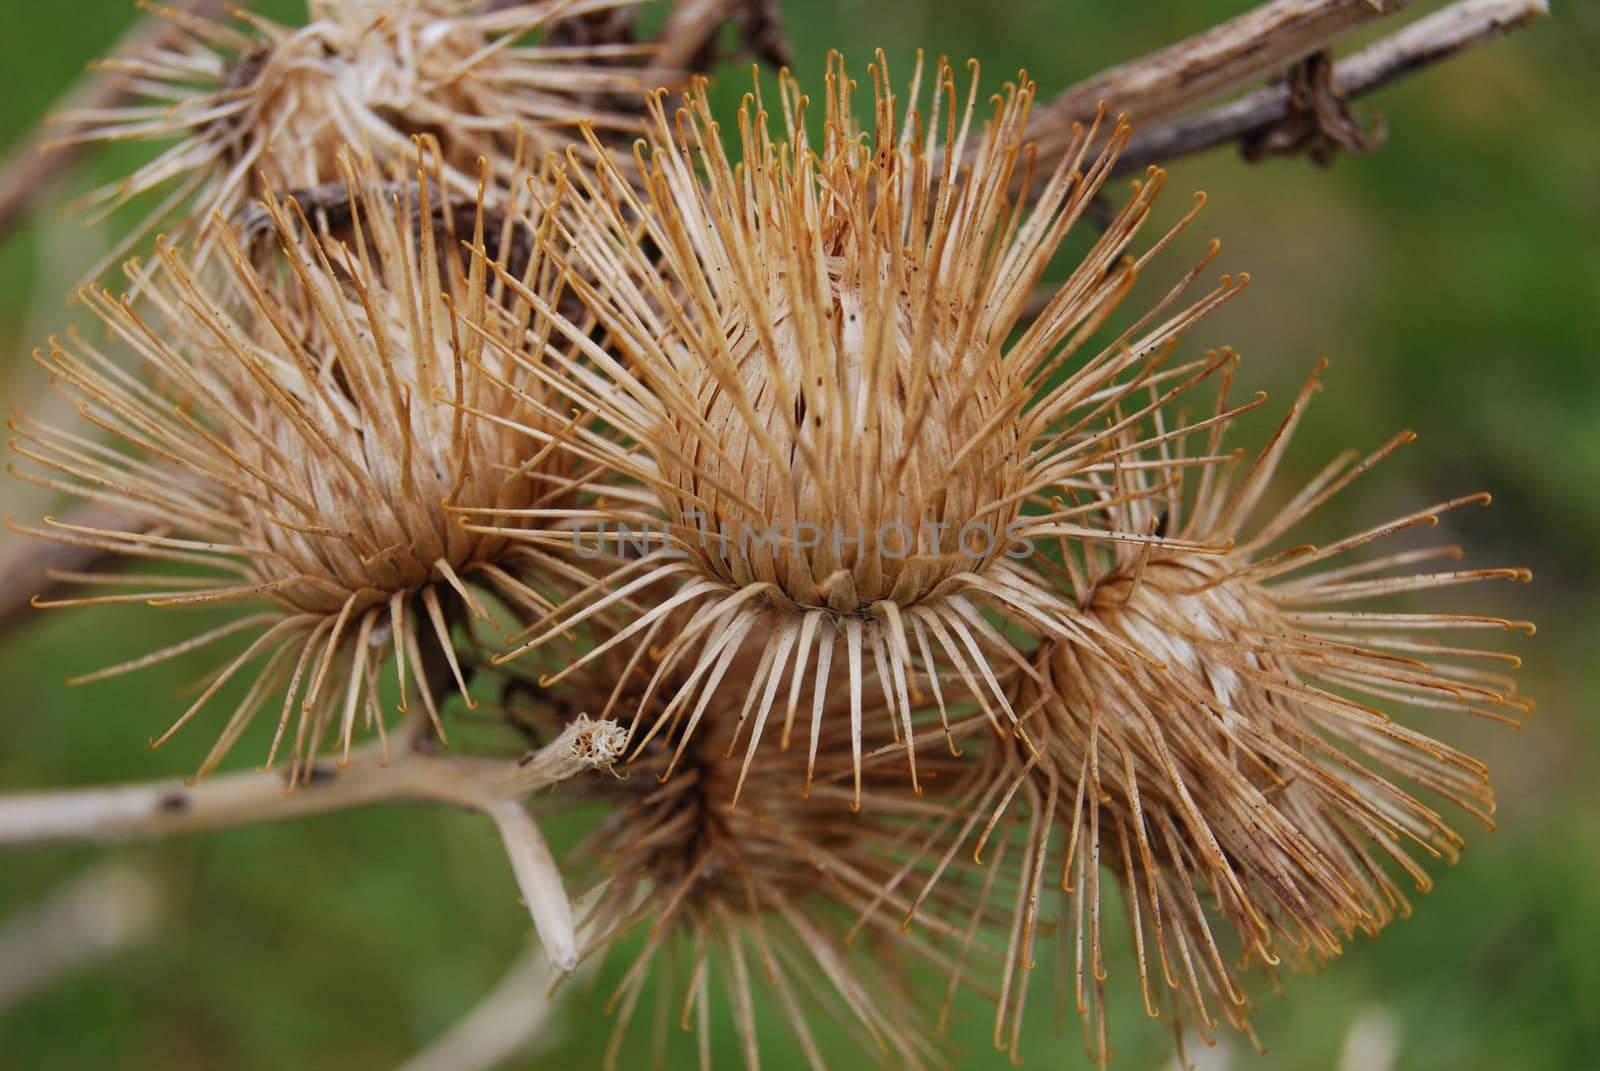 closeup of spiky dried thistle blossoms with shallow depth